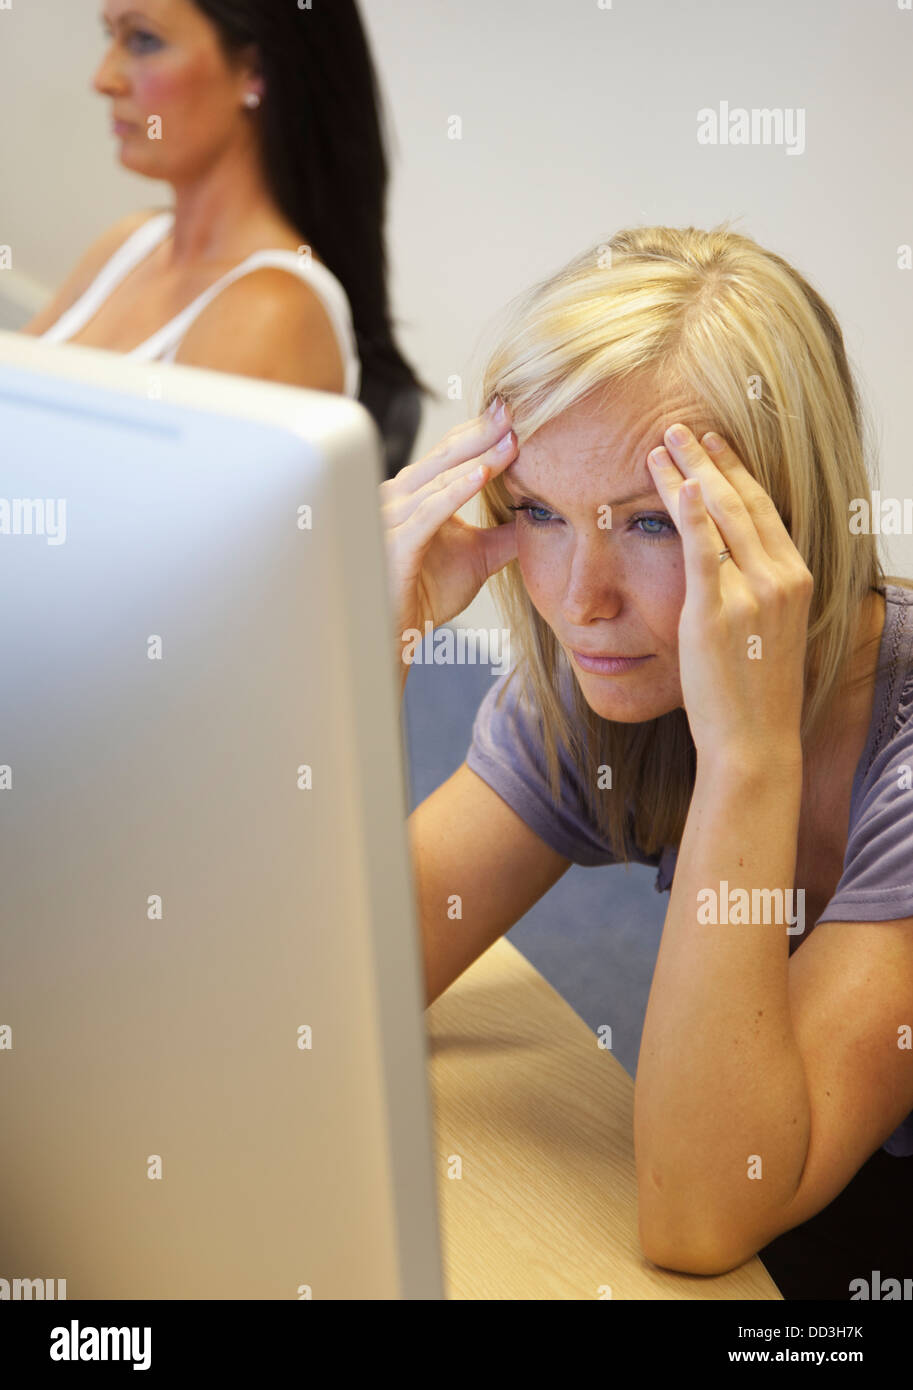 A Young Woman Struggles To Understand As She Reads From Her Computer Screen; South Shields, Tyne And Wear, England Stock Photo